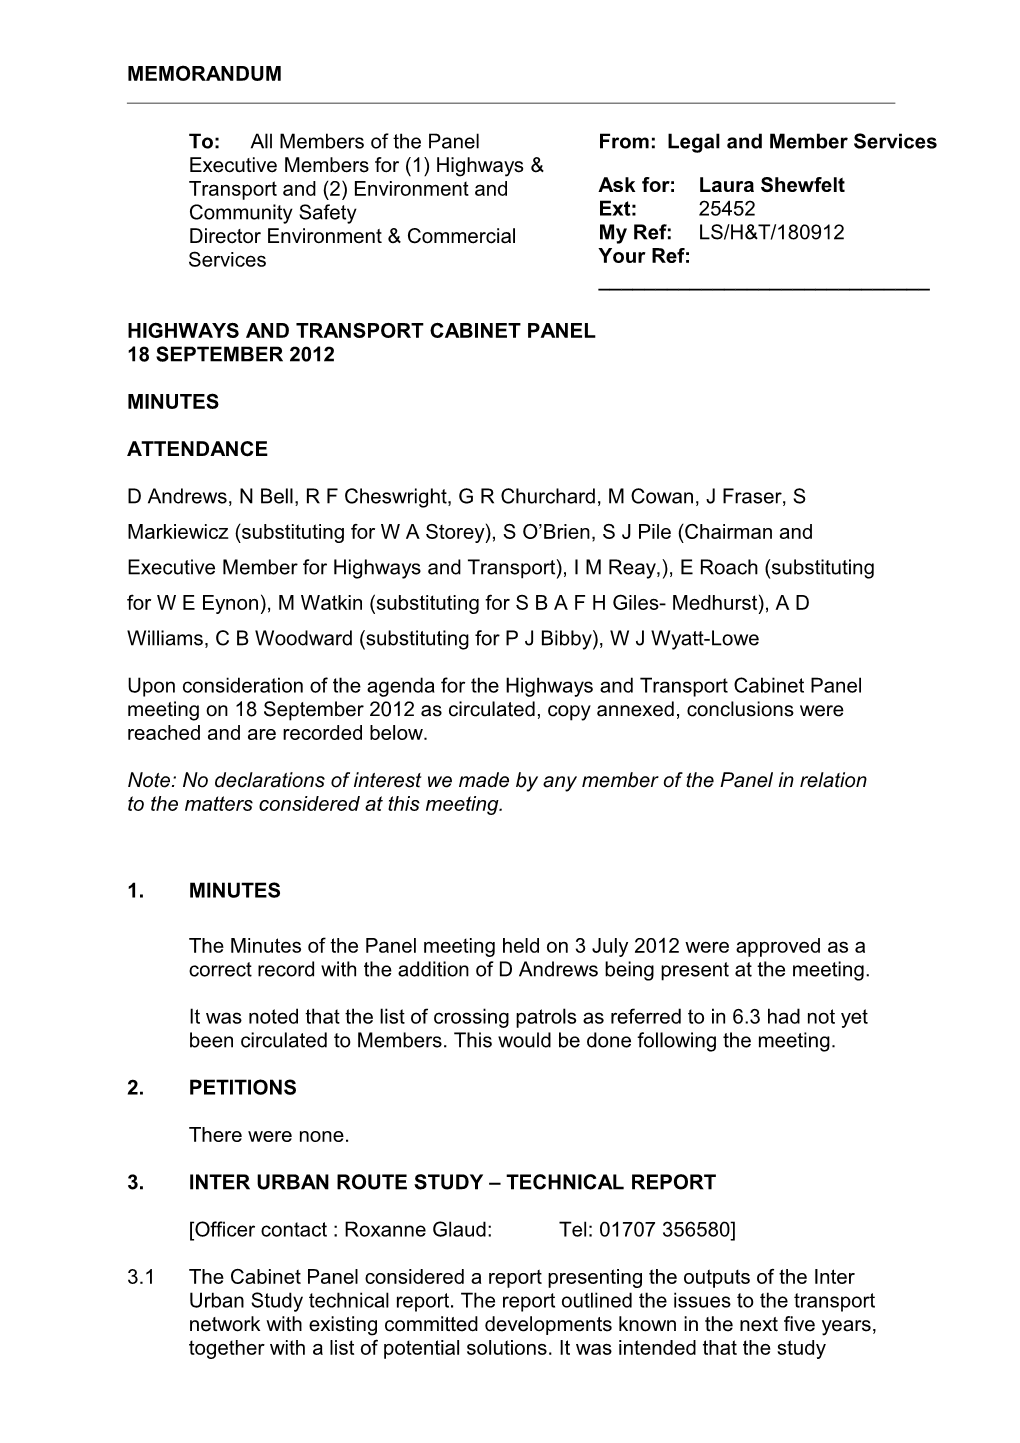 Highway and Transport Cabinet Panel Minutes - 7 September 2010